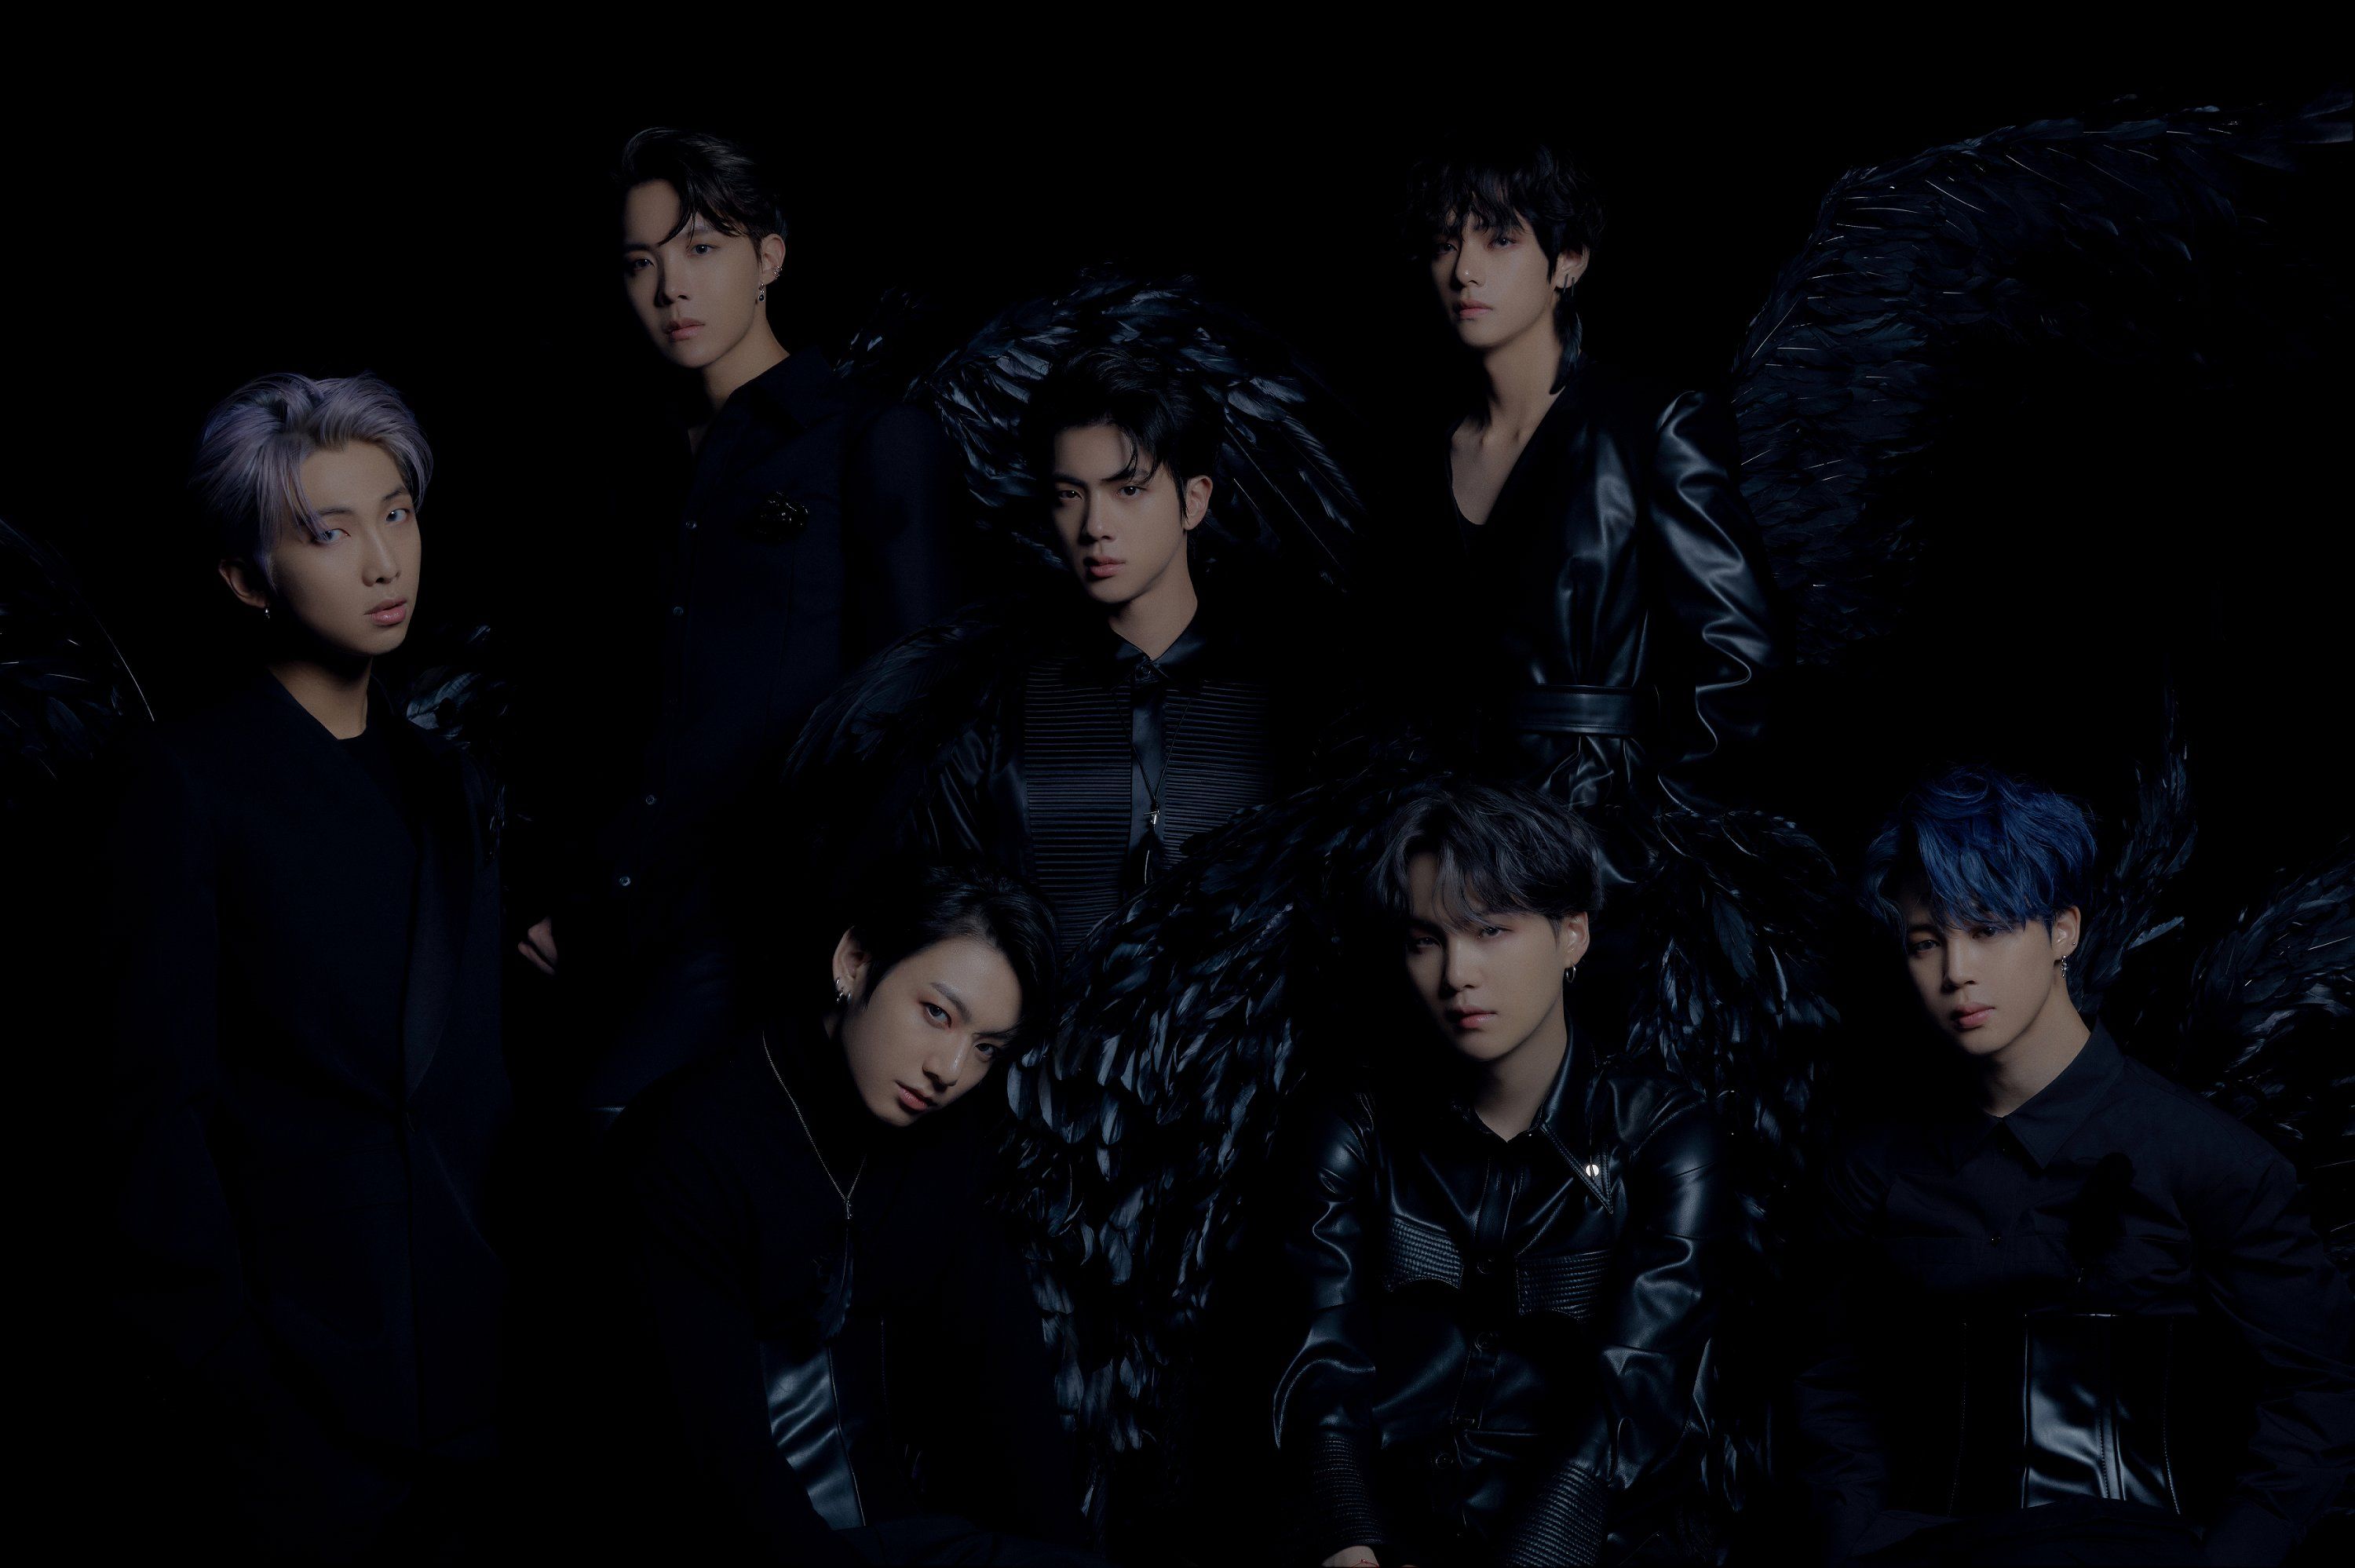 BTS Transforms Into Black Swans For “Map Of The Soul: 7” Concept